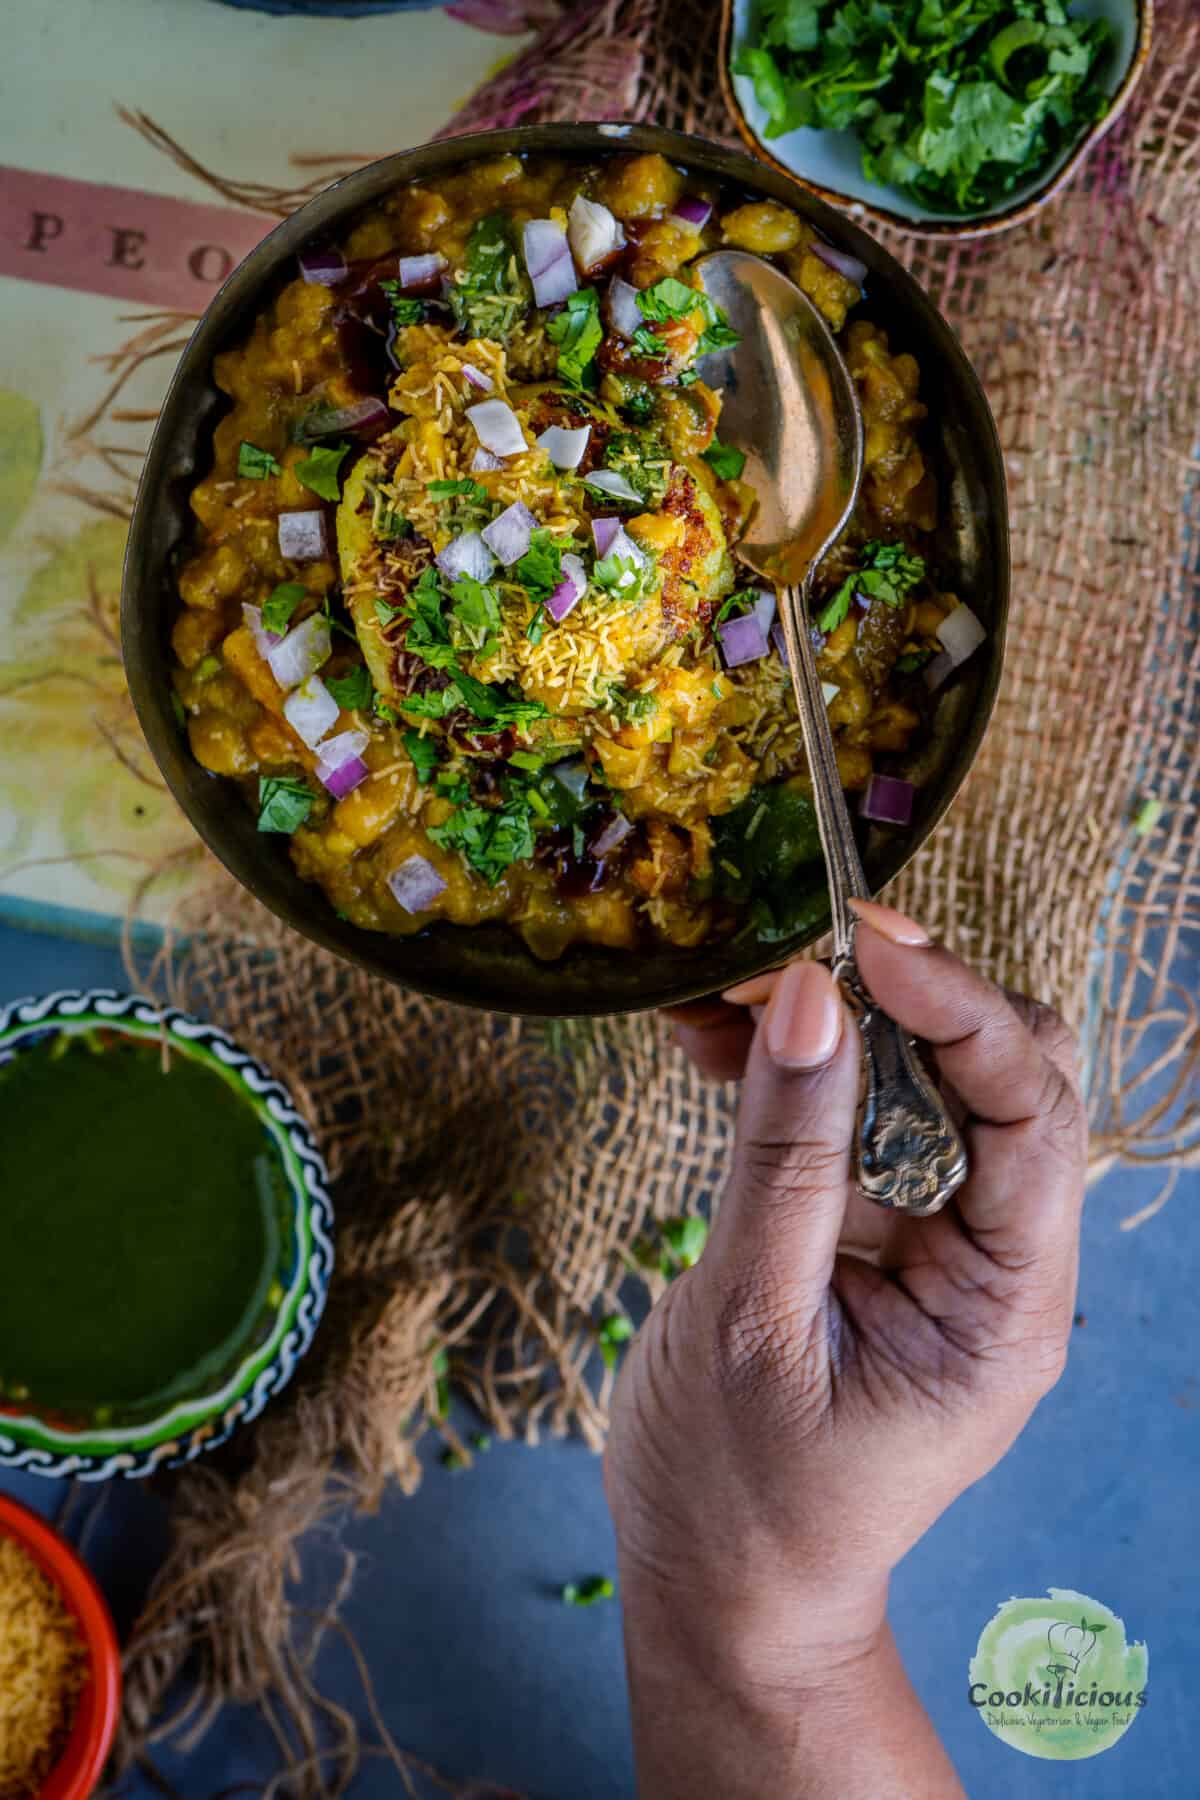 a hand digging into a plate of 2 bowls of Ragda Pattice, holding a spoon. 